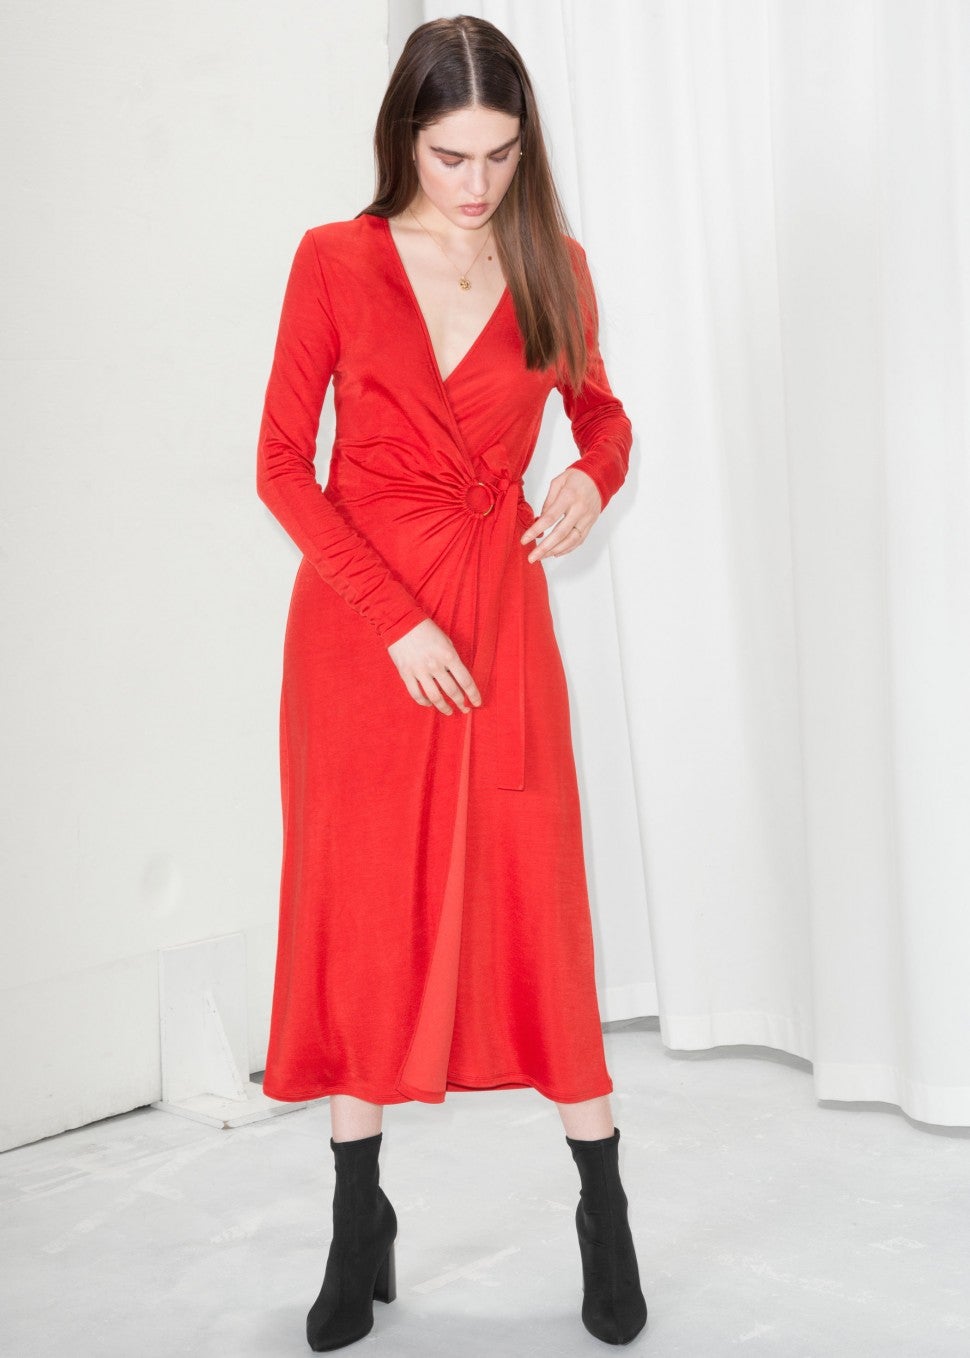 & Other Stories red wrap dress